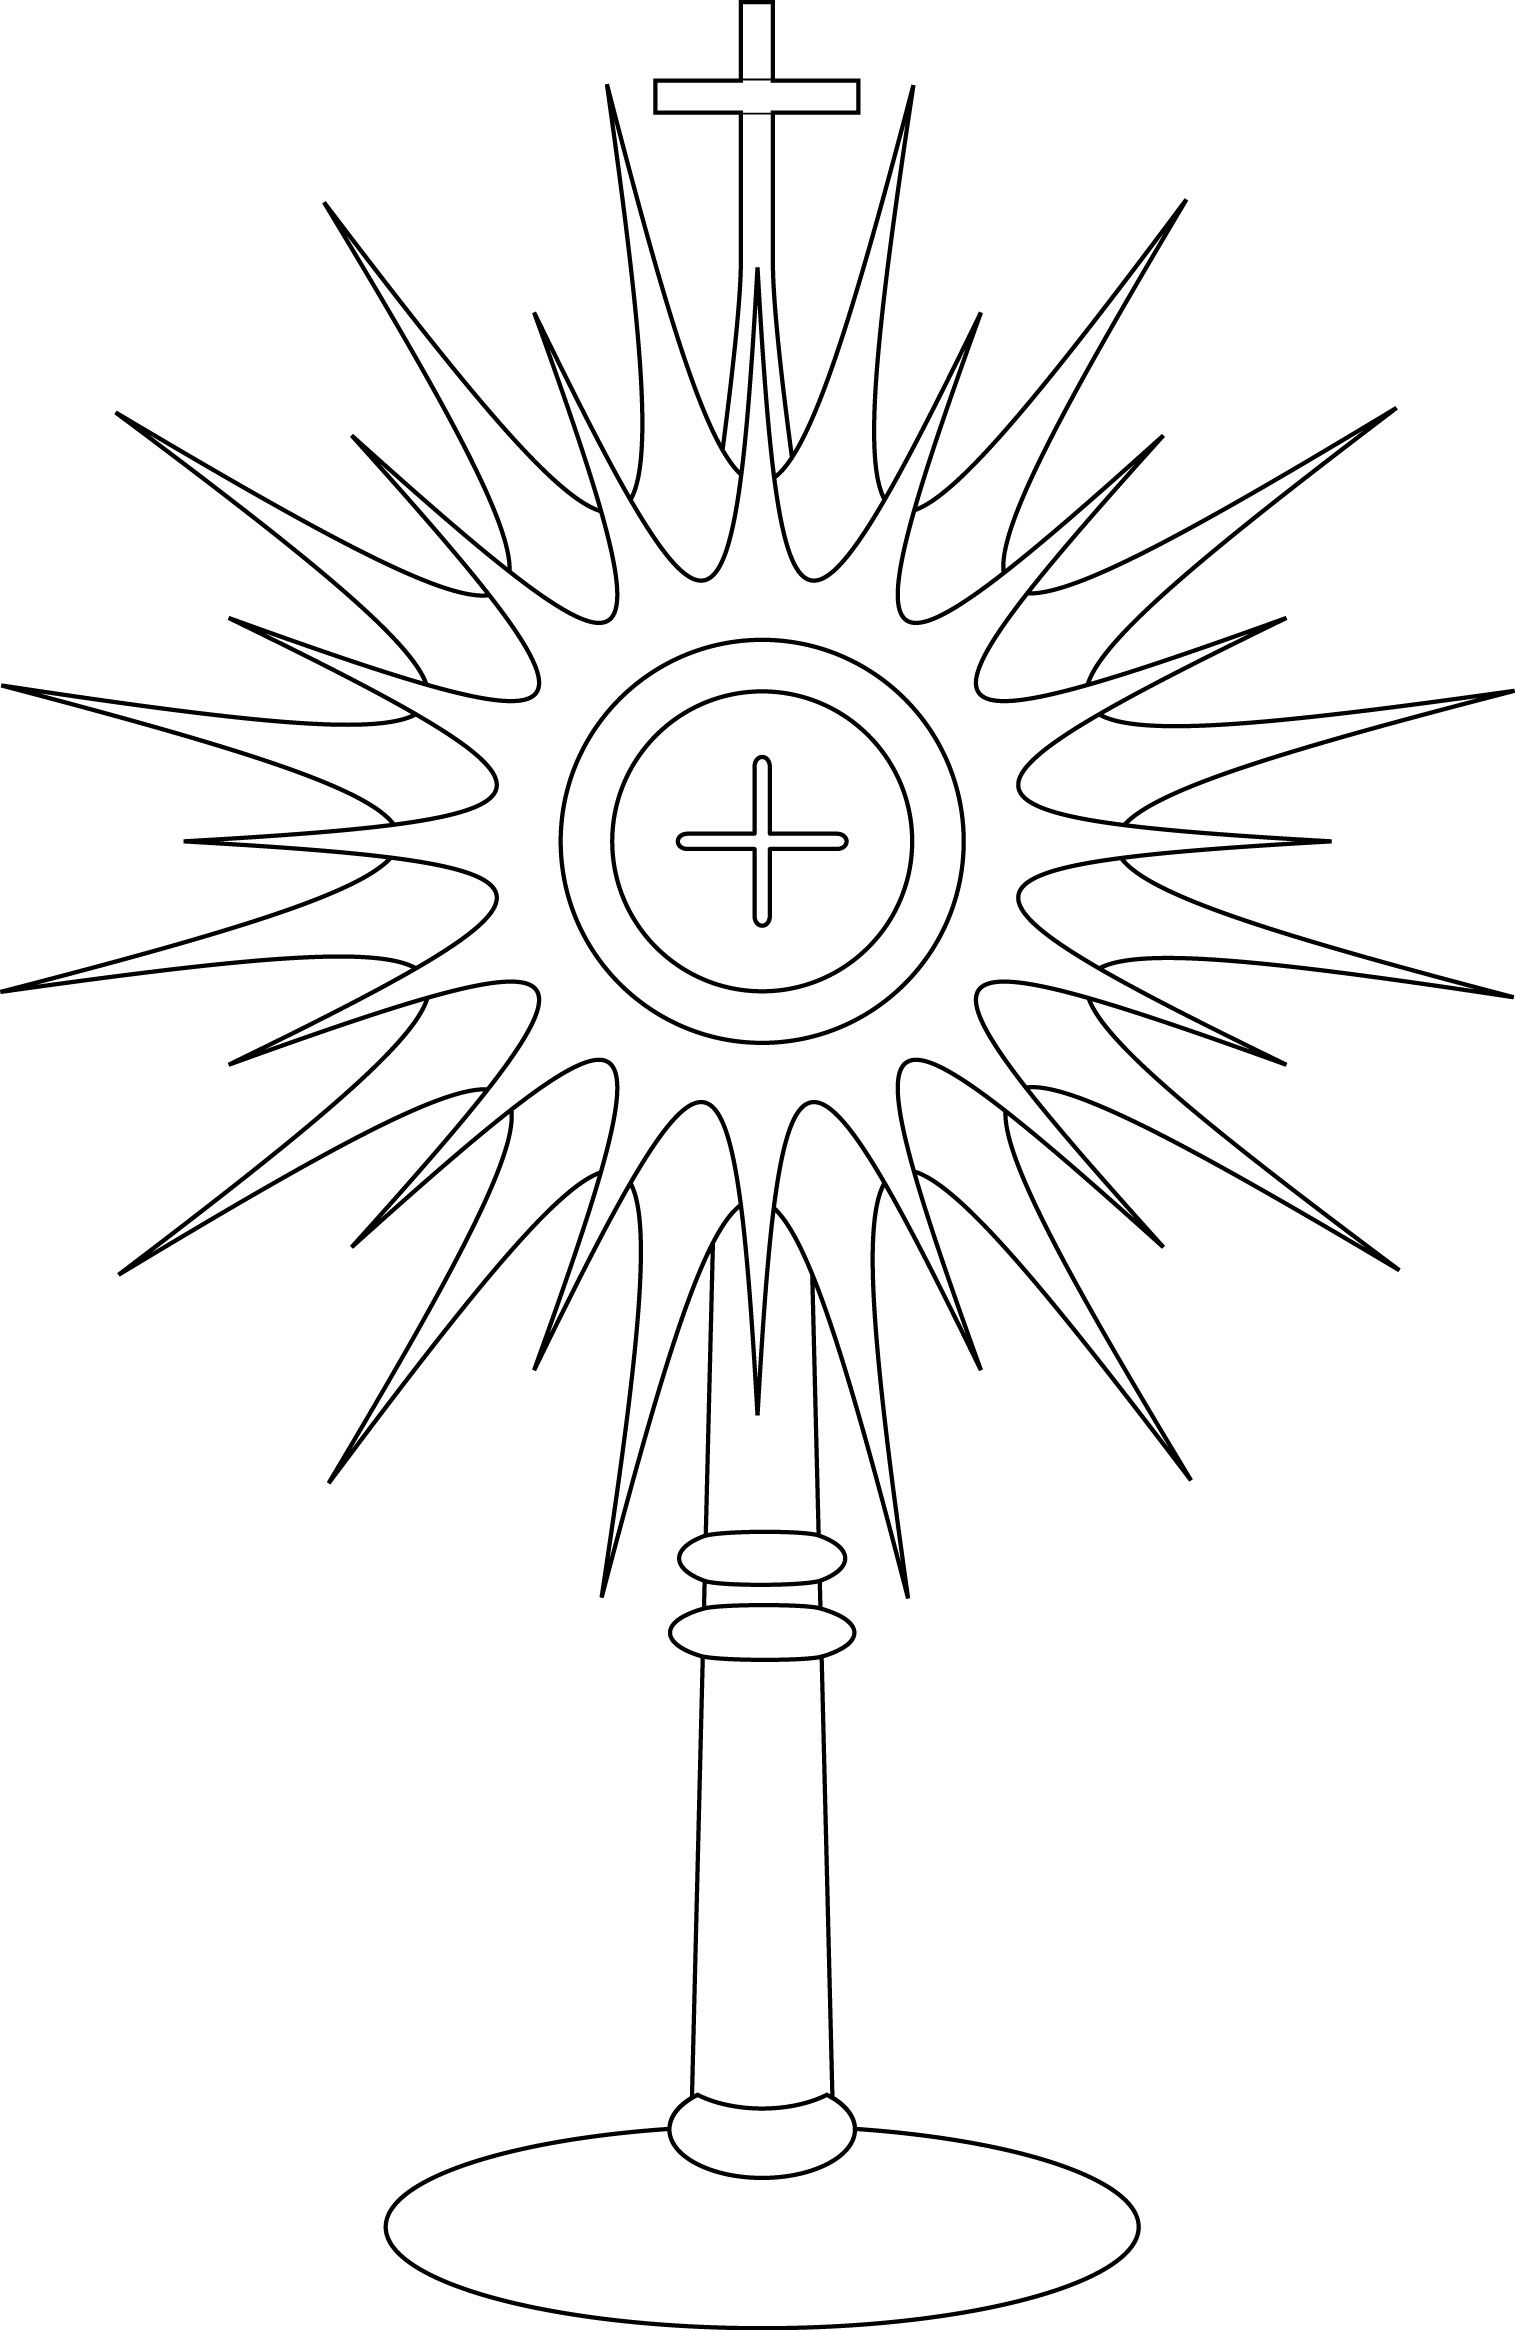 Monstrance coloring page.